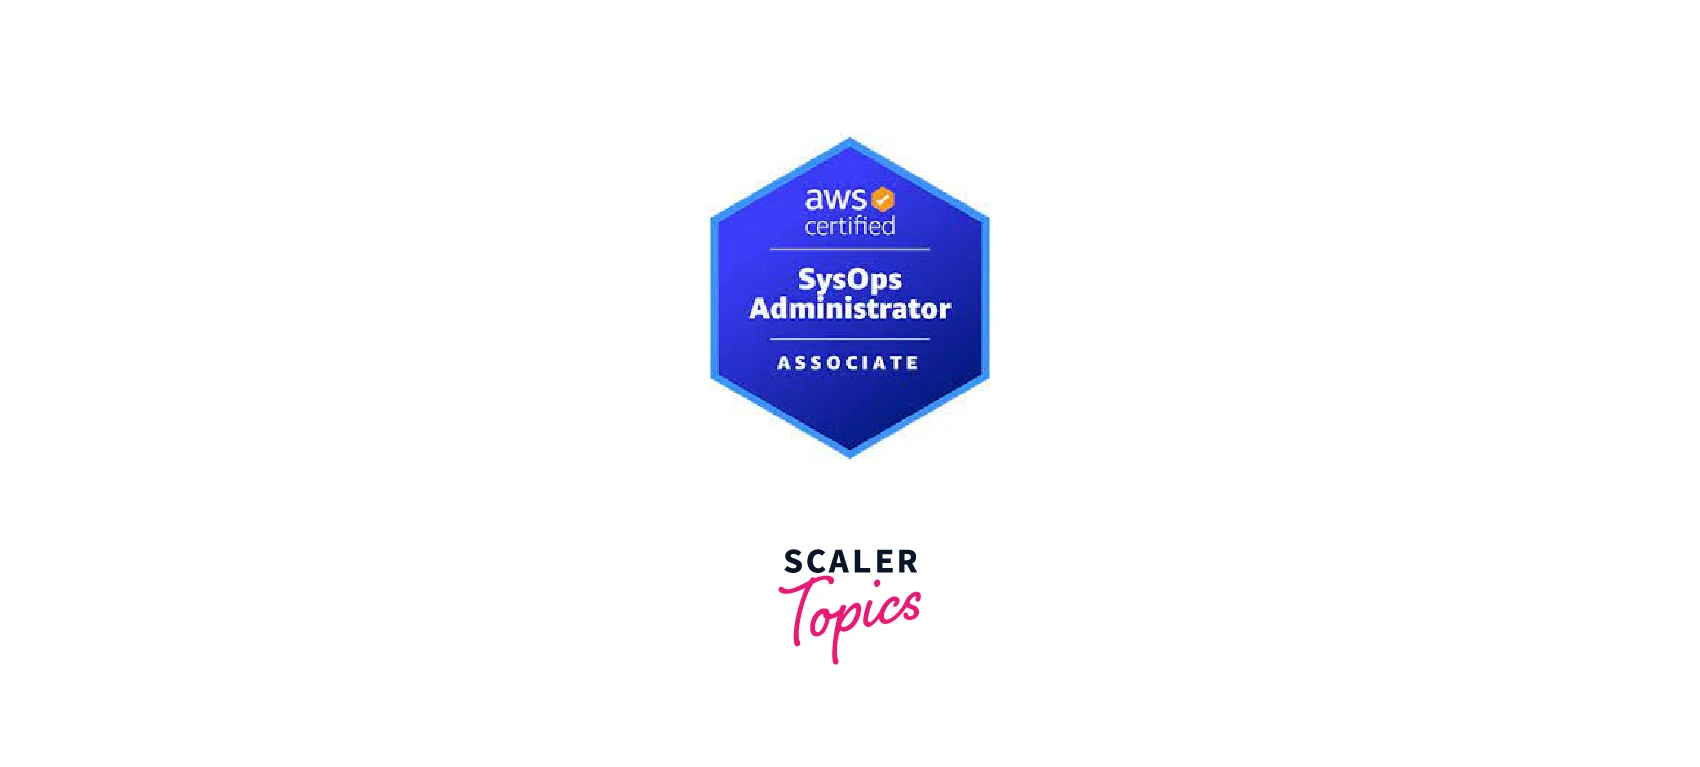 aws-certified-sysops-administrator